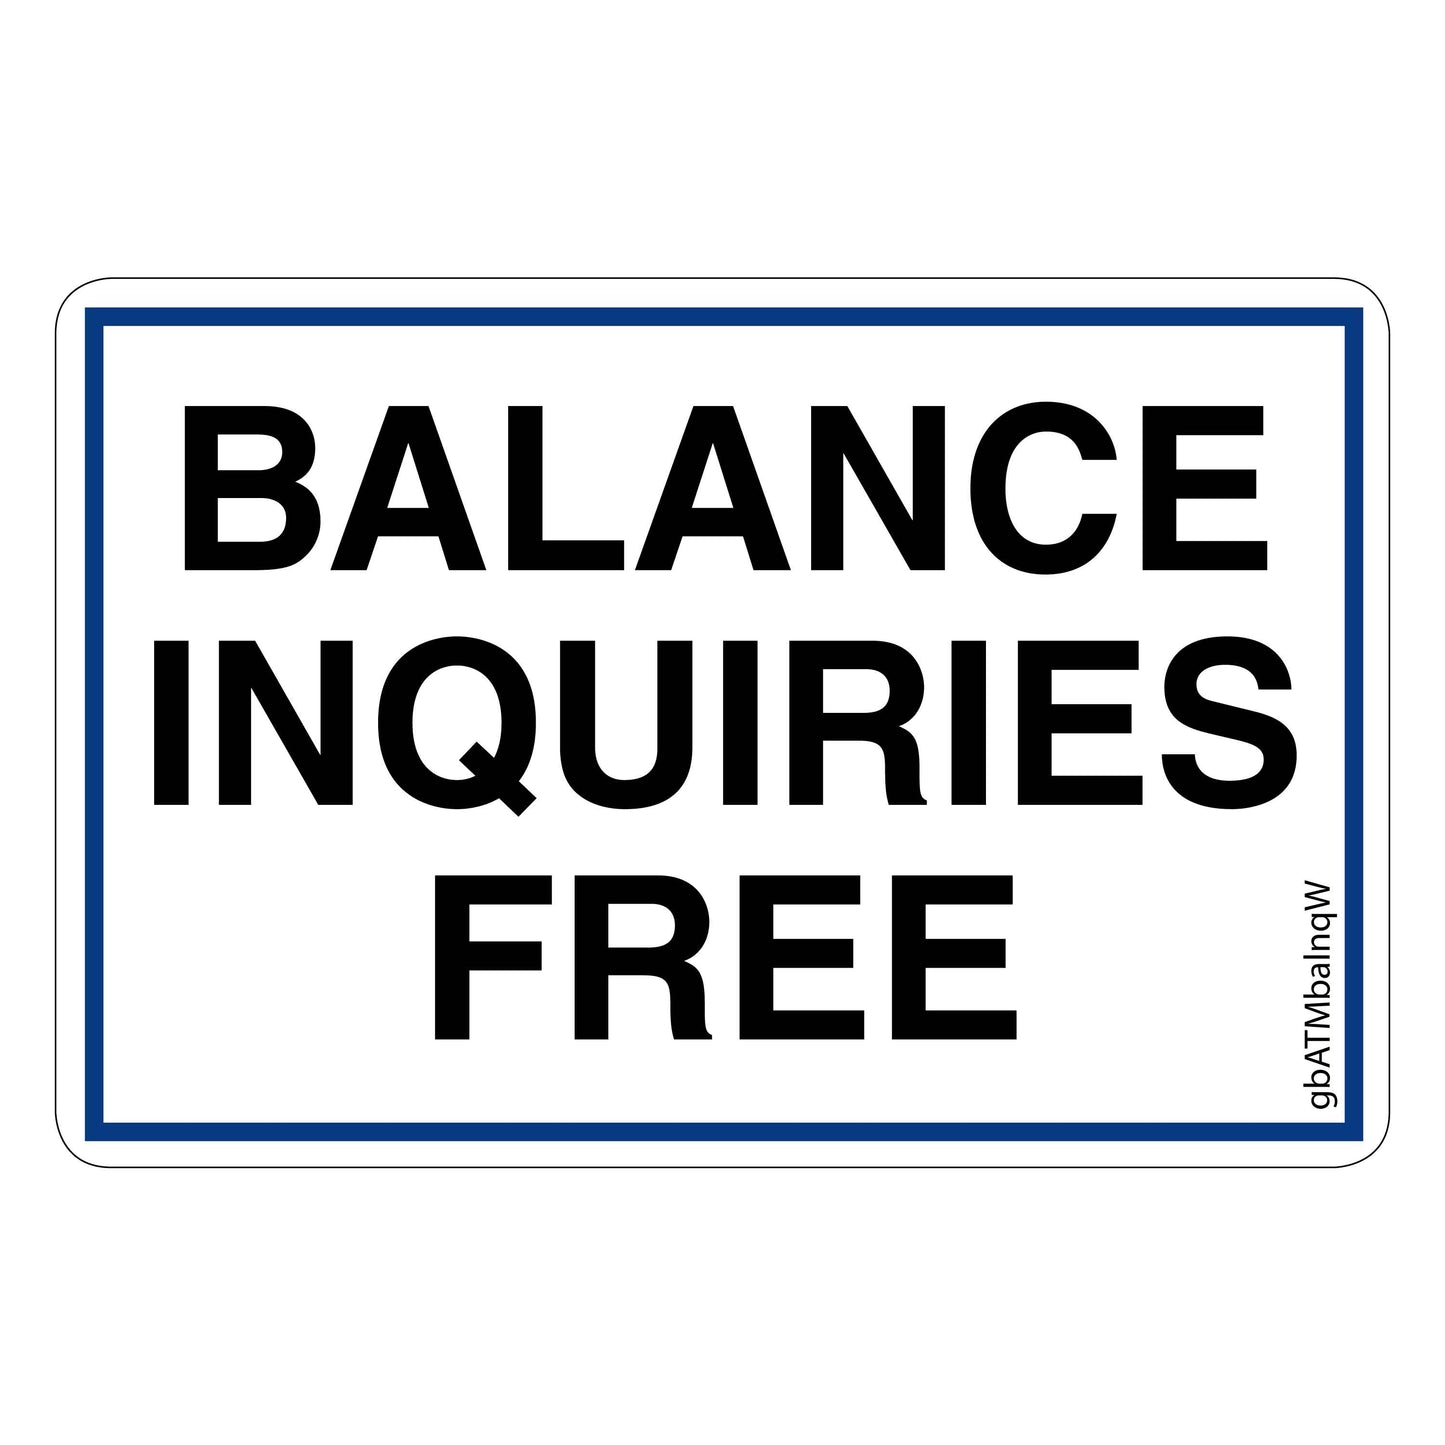 Balance Inquiries Free Decal, White with Blue Stripe. 3 inches by 2 inches in size.